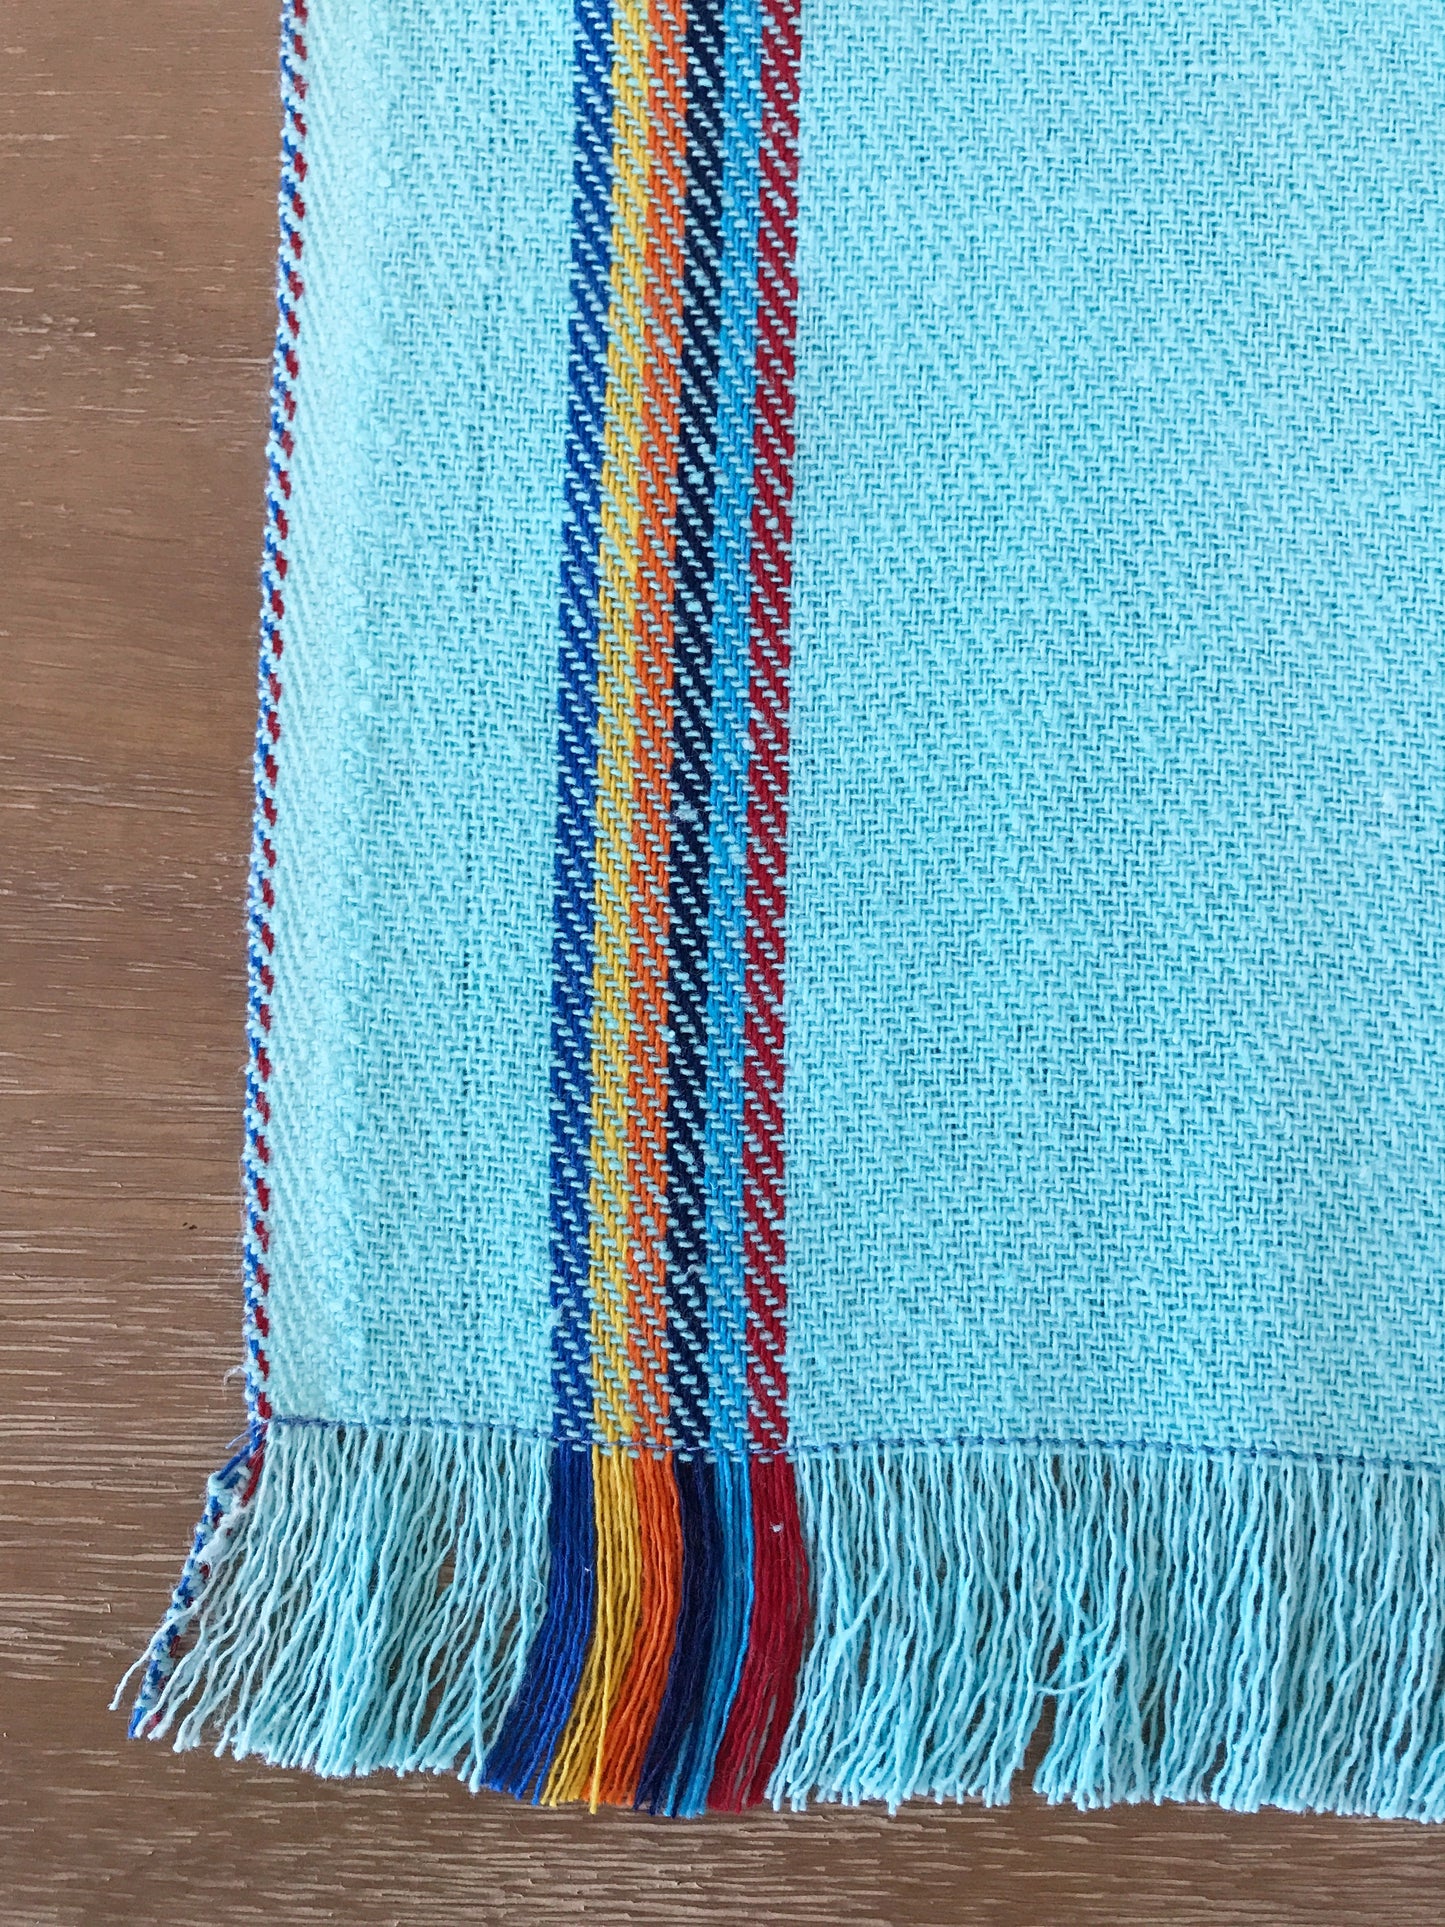 Mexican turquoise jerga table runner